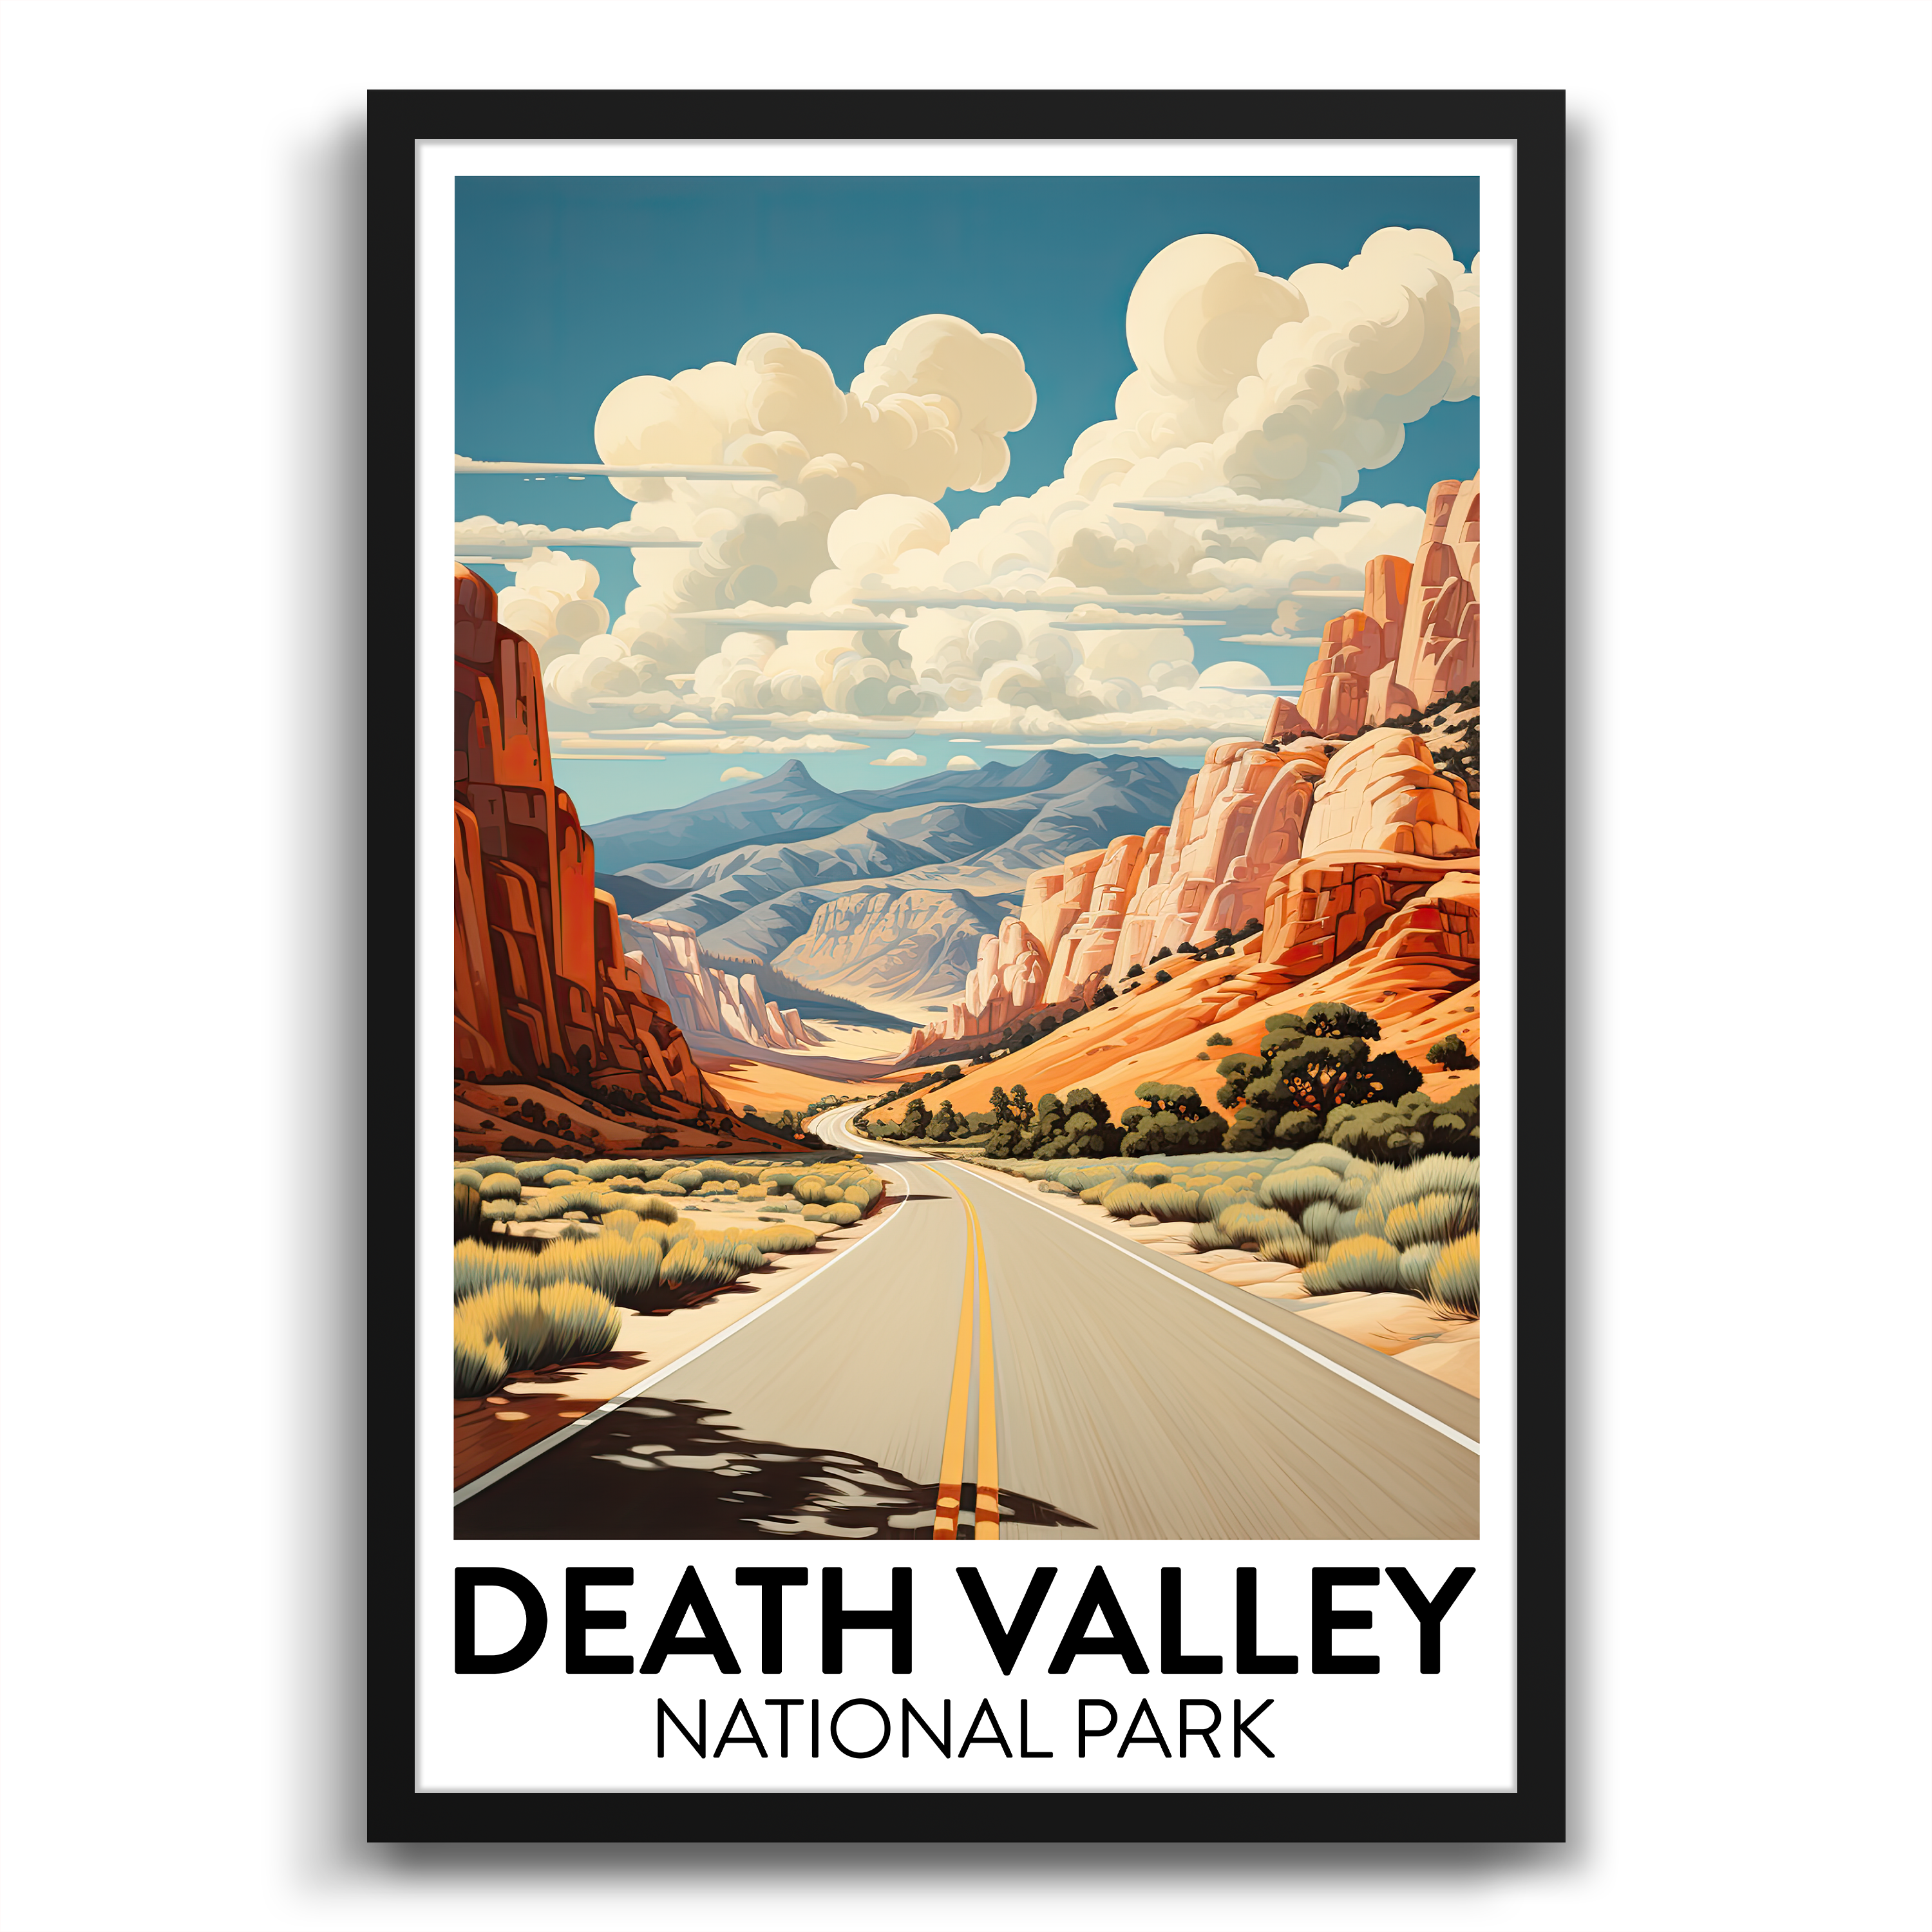 Journey through death valley by road poster